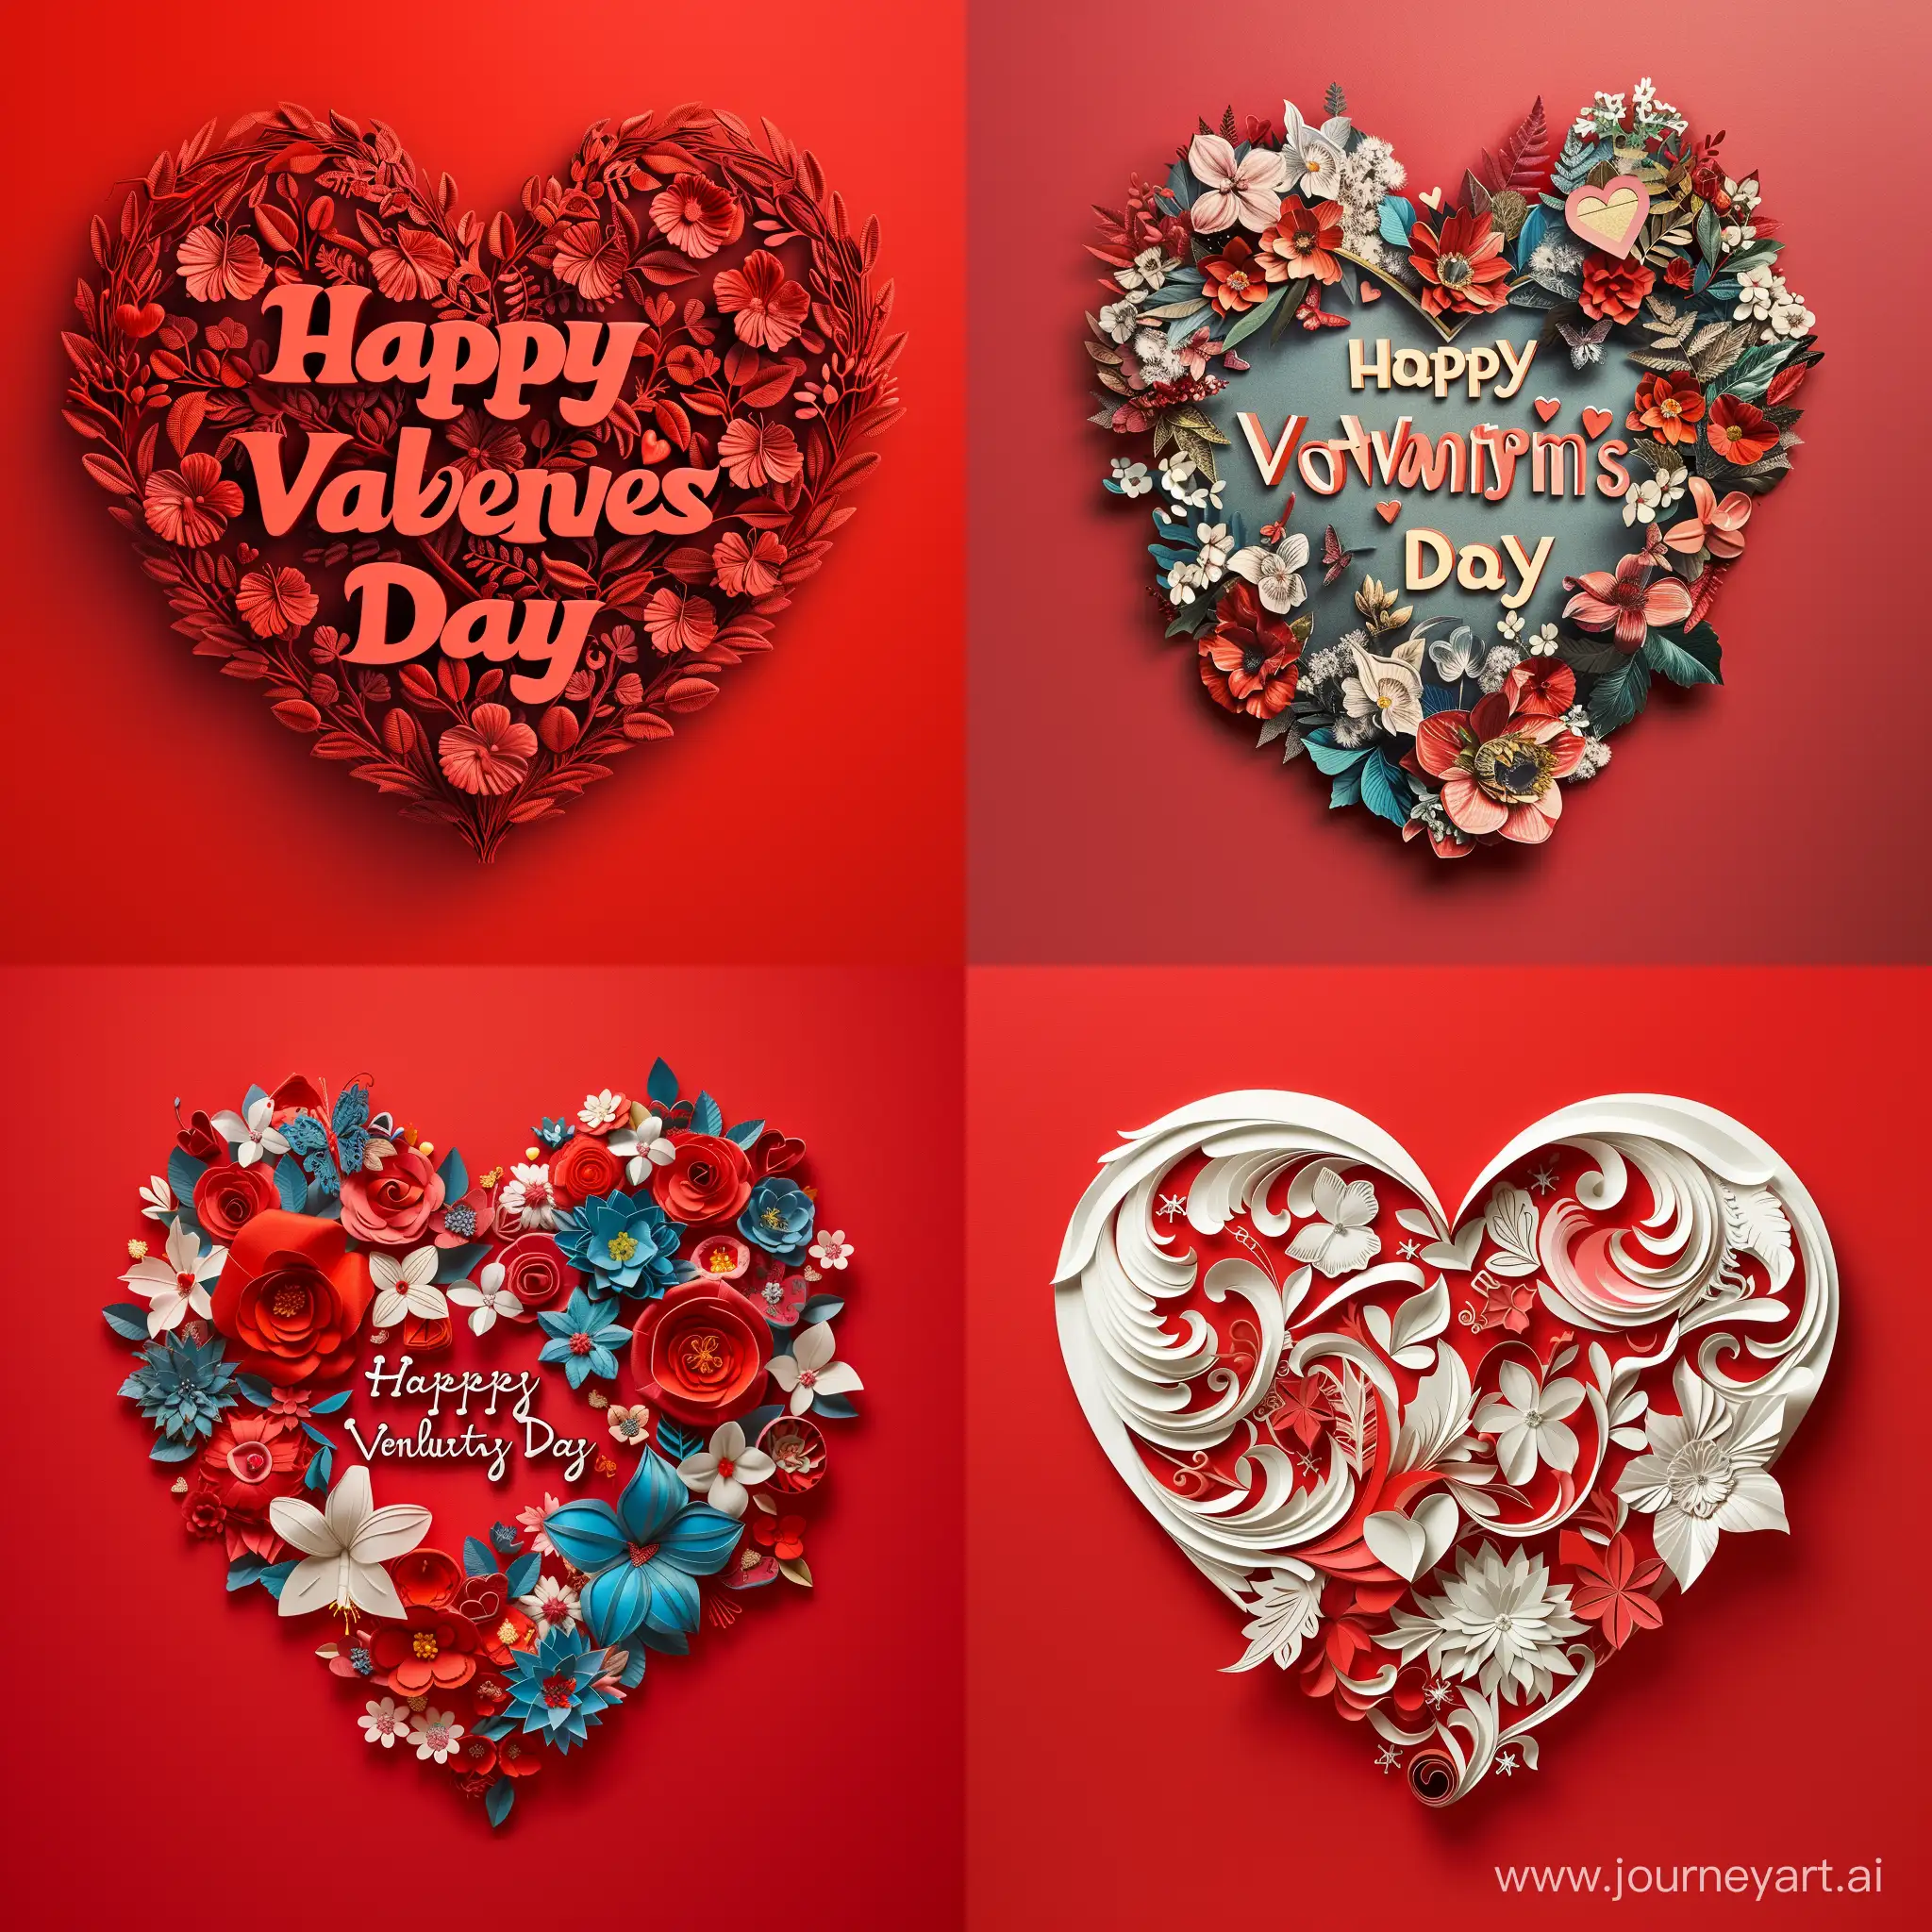 Happy-Valentines-Day-Celebration-with-Red-Hearts-on-Vibrant-Background